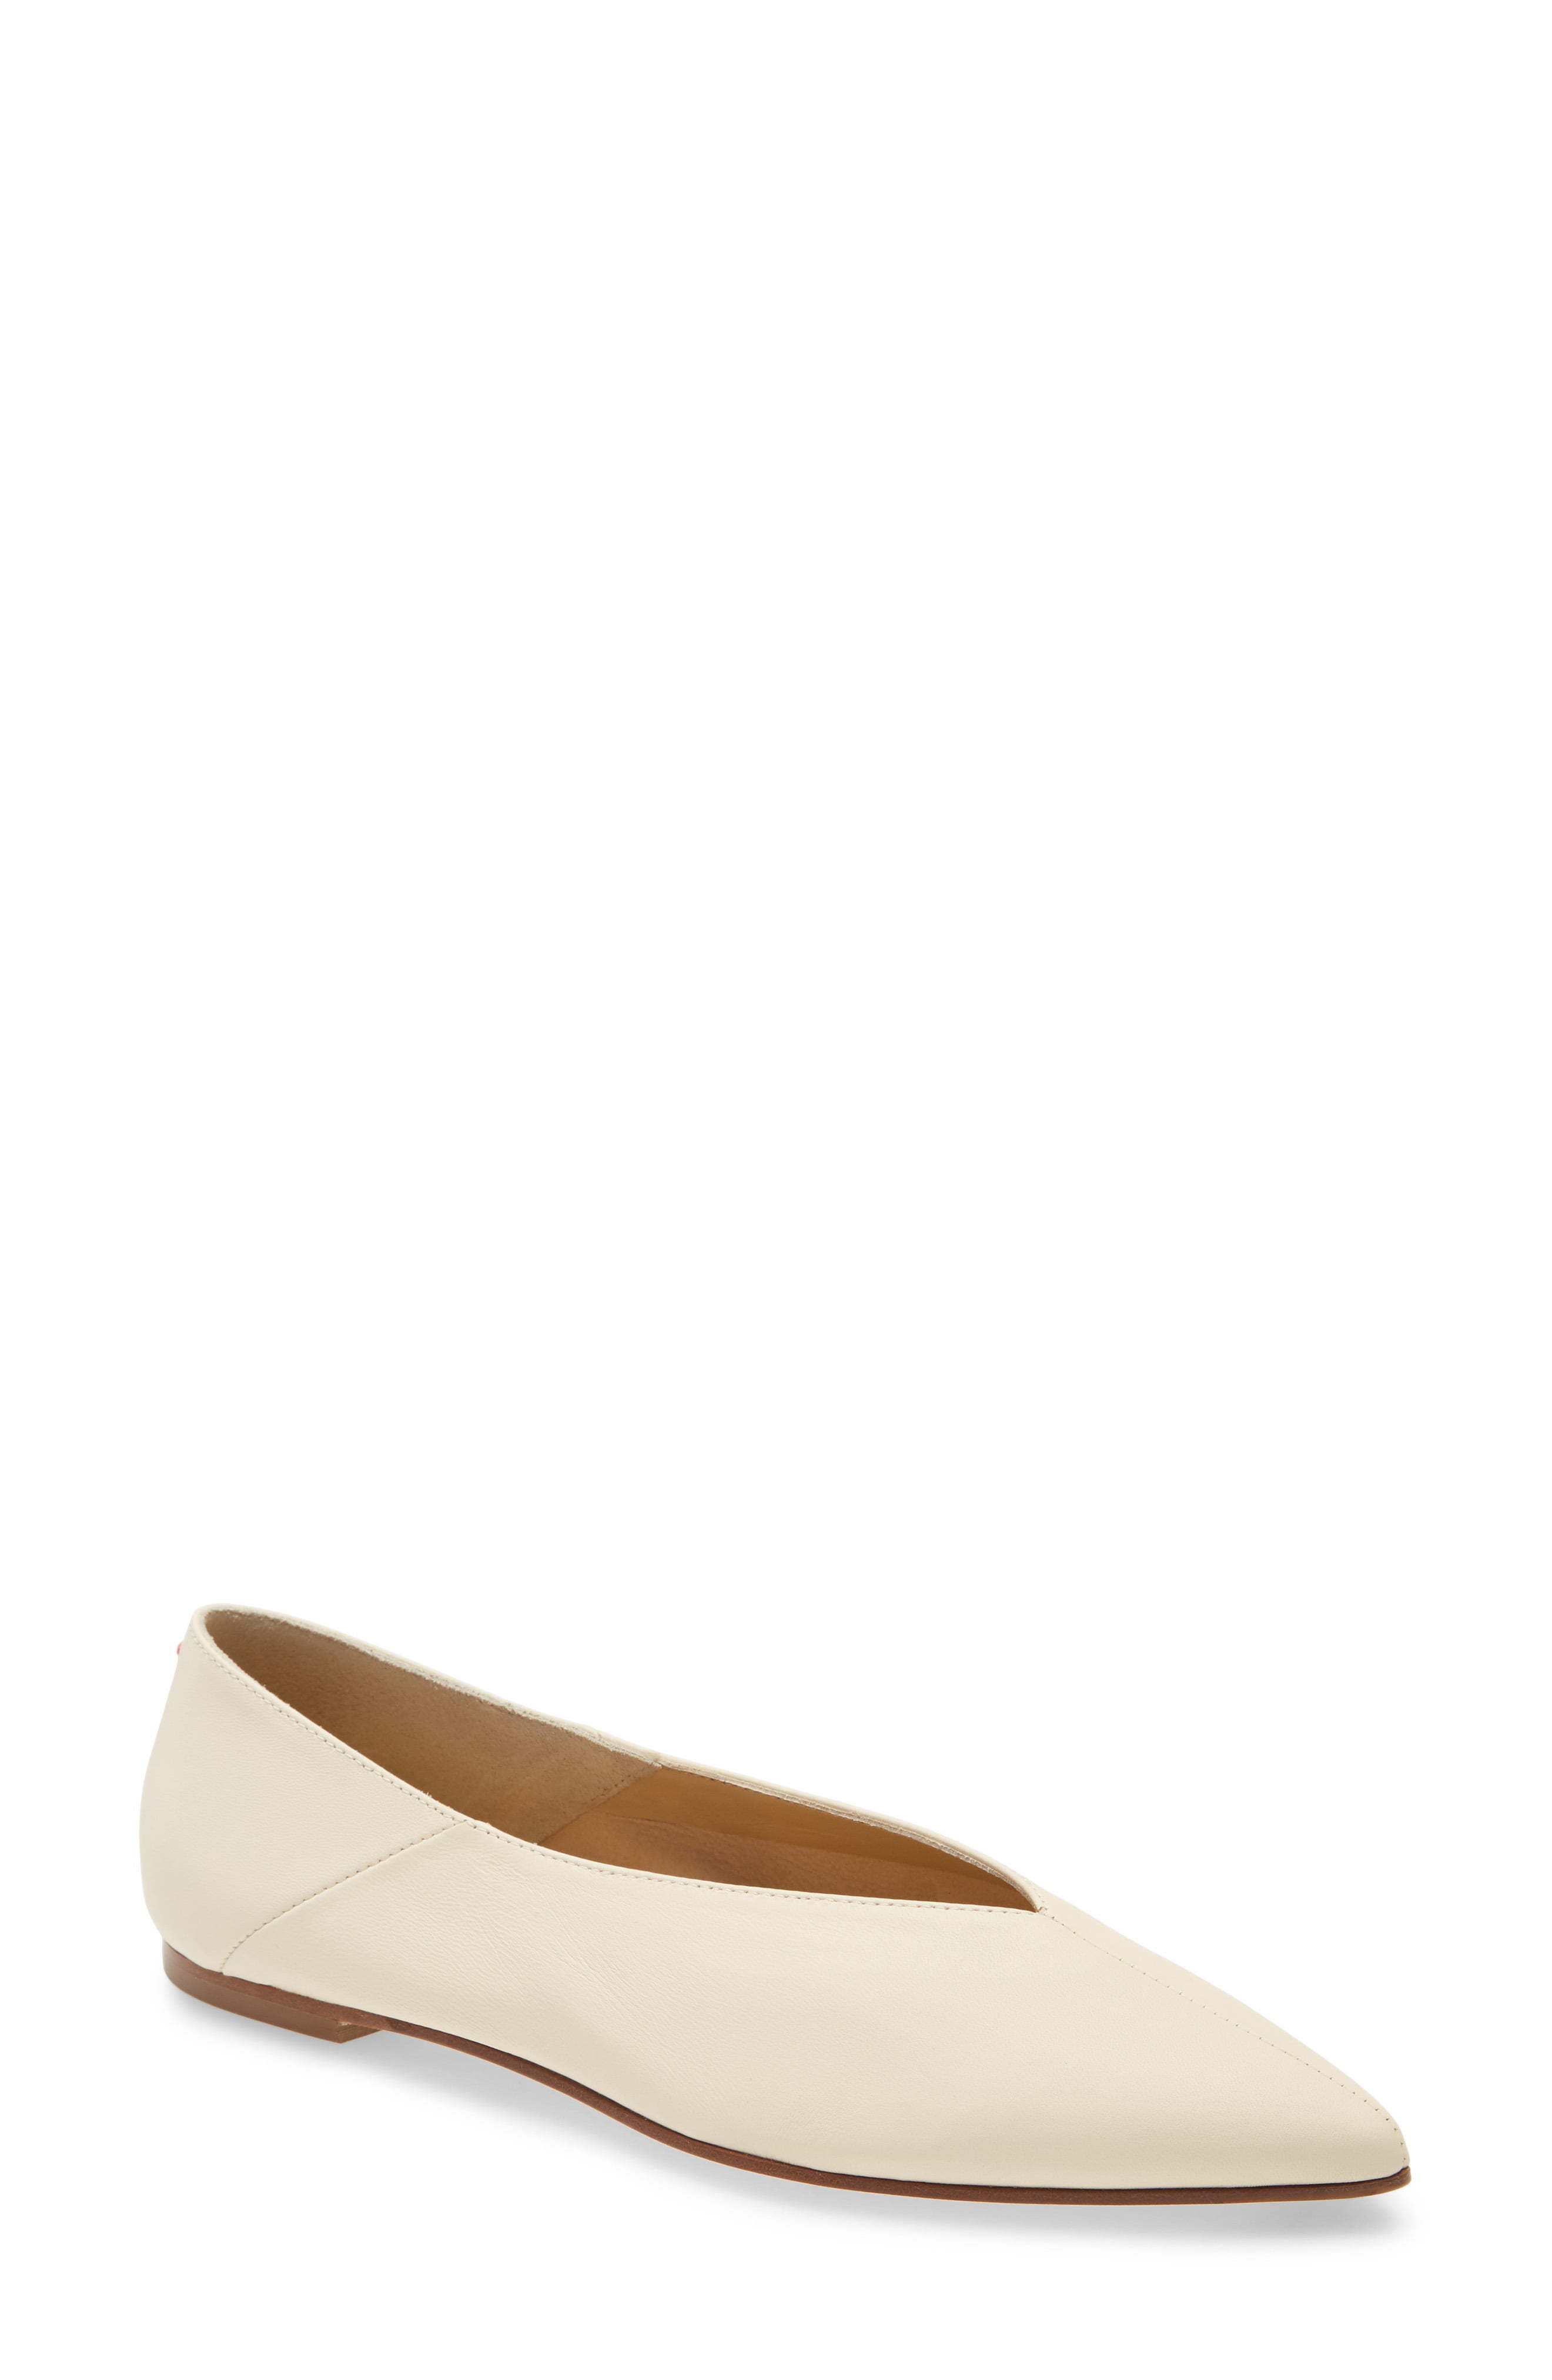 Aeyde Moa Pointed Toe Flat, $295 | Nordstrom | Lookastic